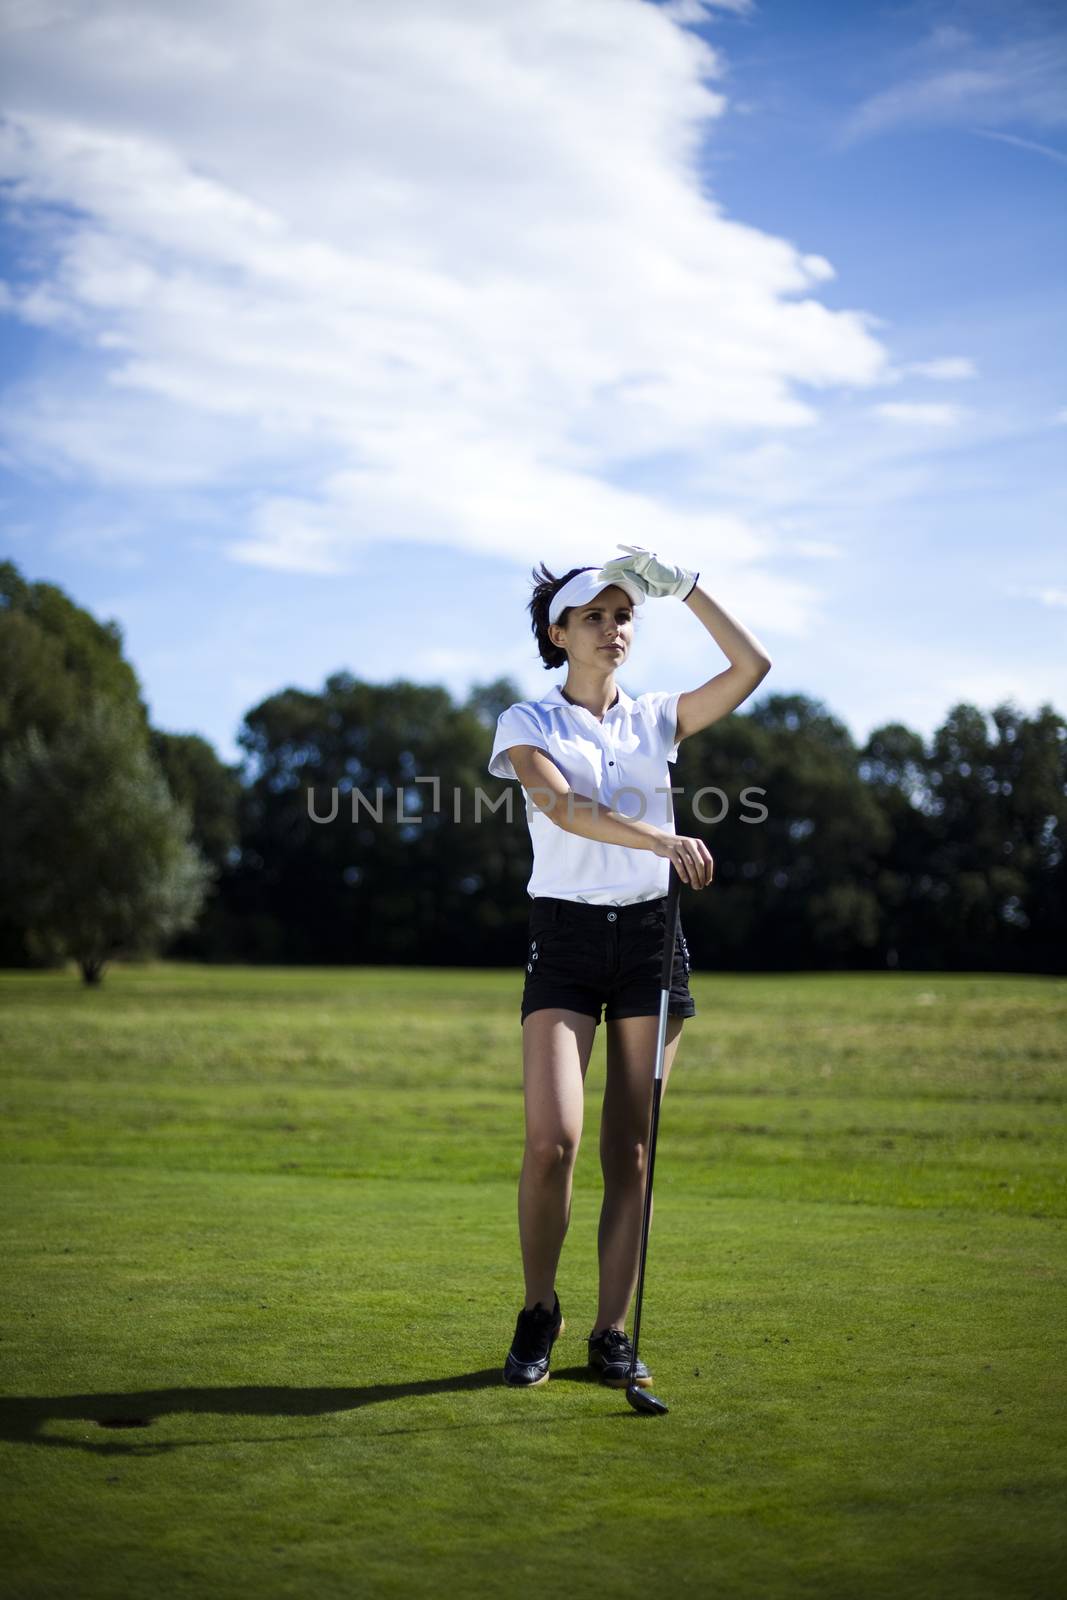 Thumbs up on golf, bright colorful vivid theme by JanPietruszka